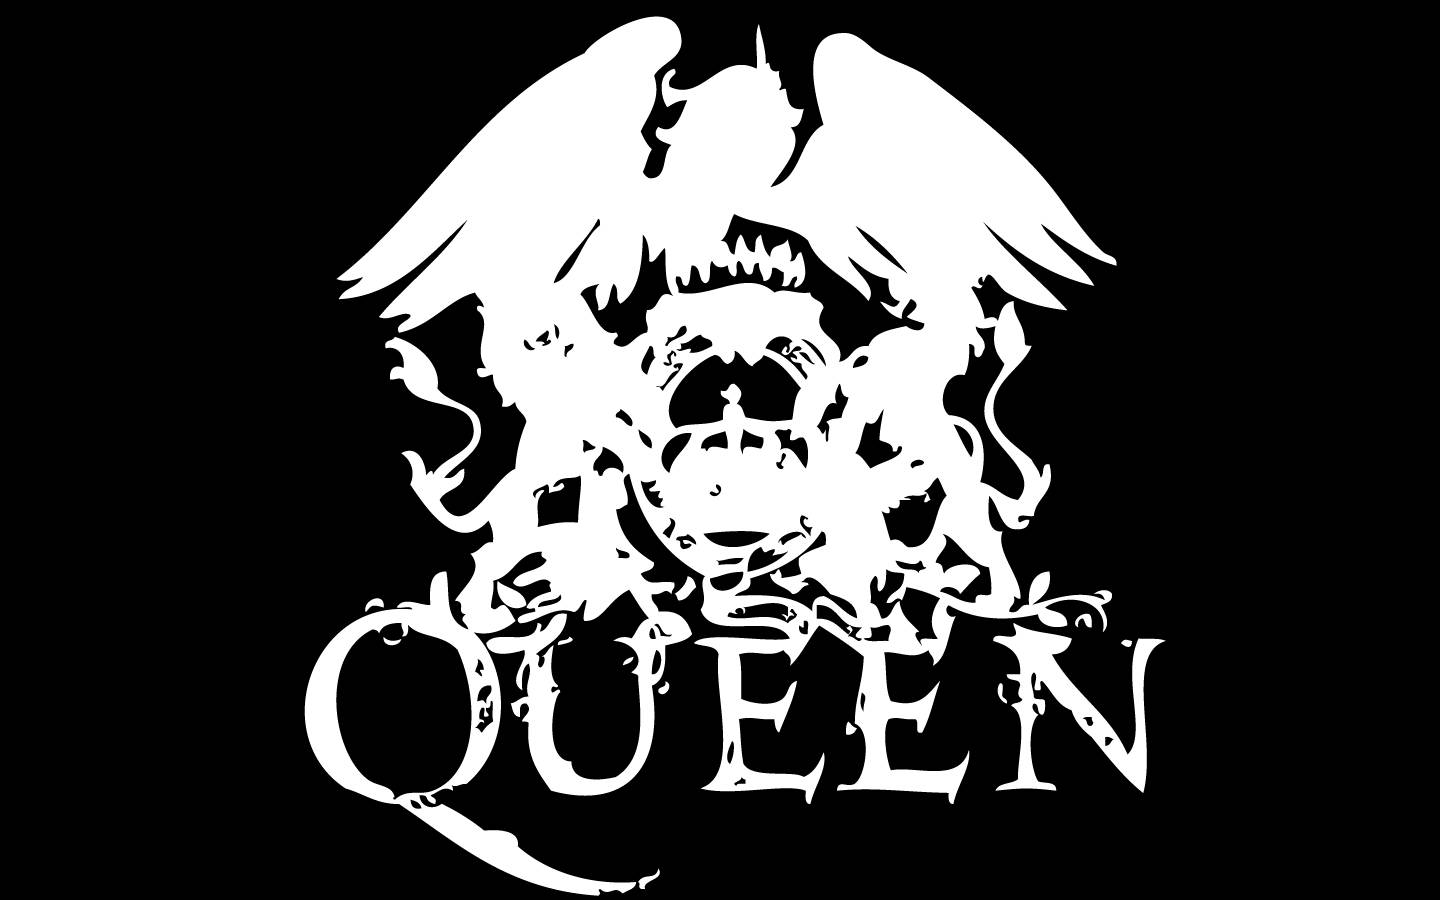 1440X900 Queen Wallpaper and Background